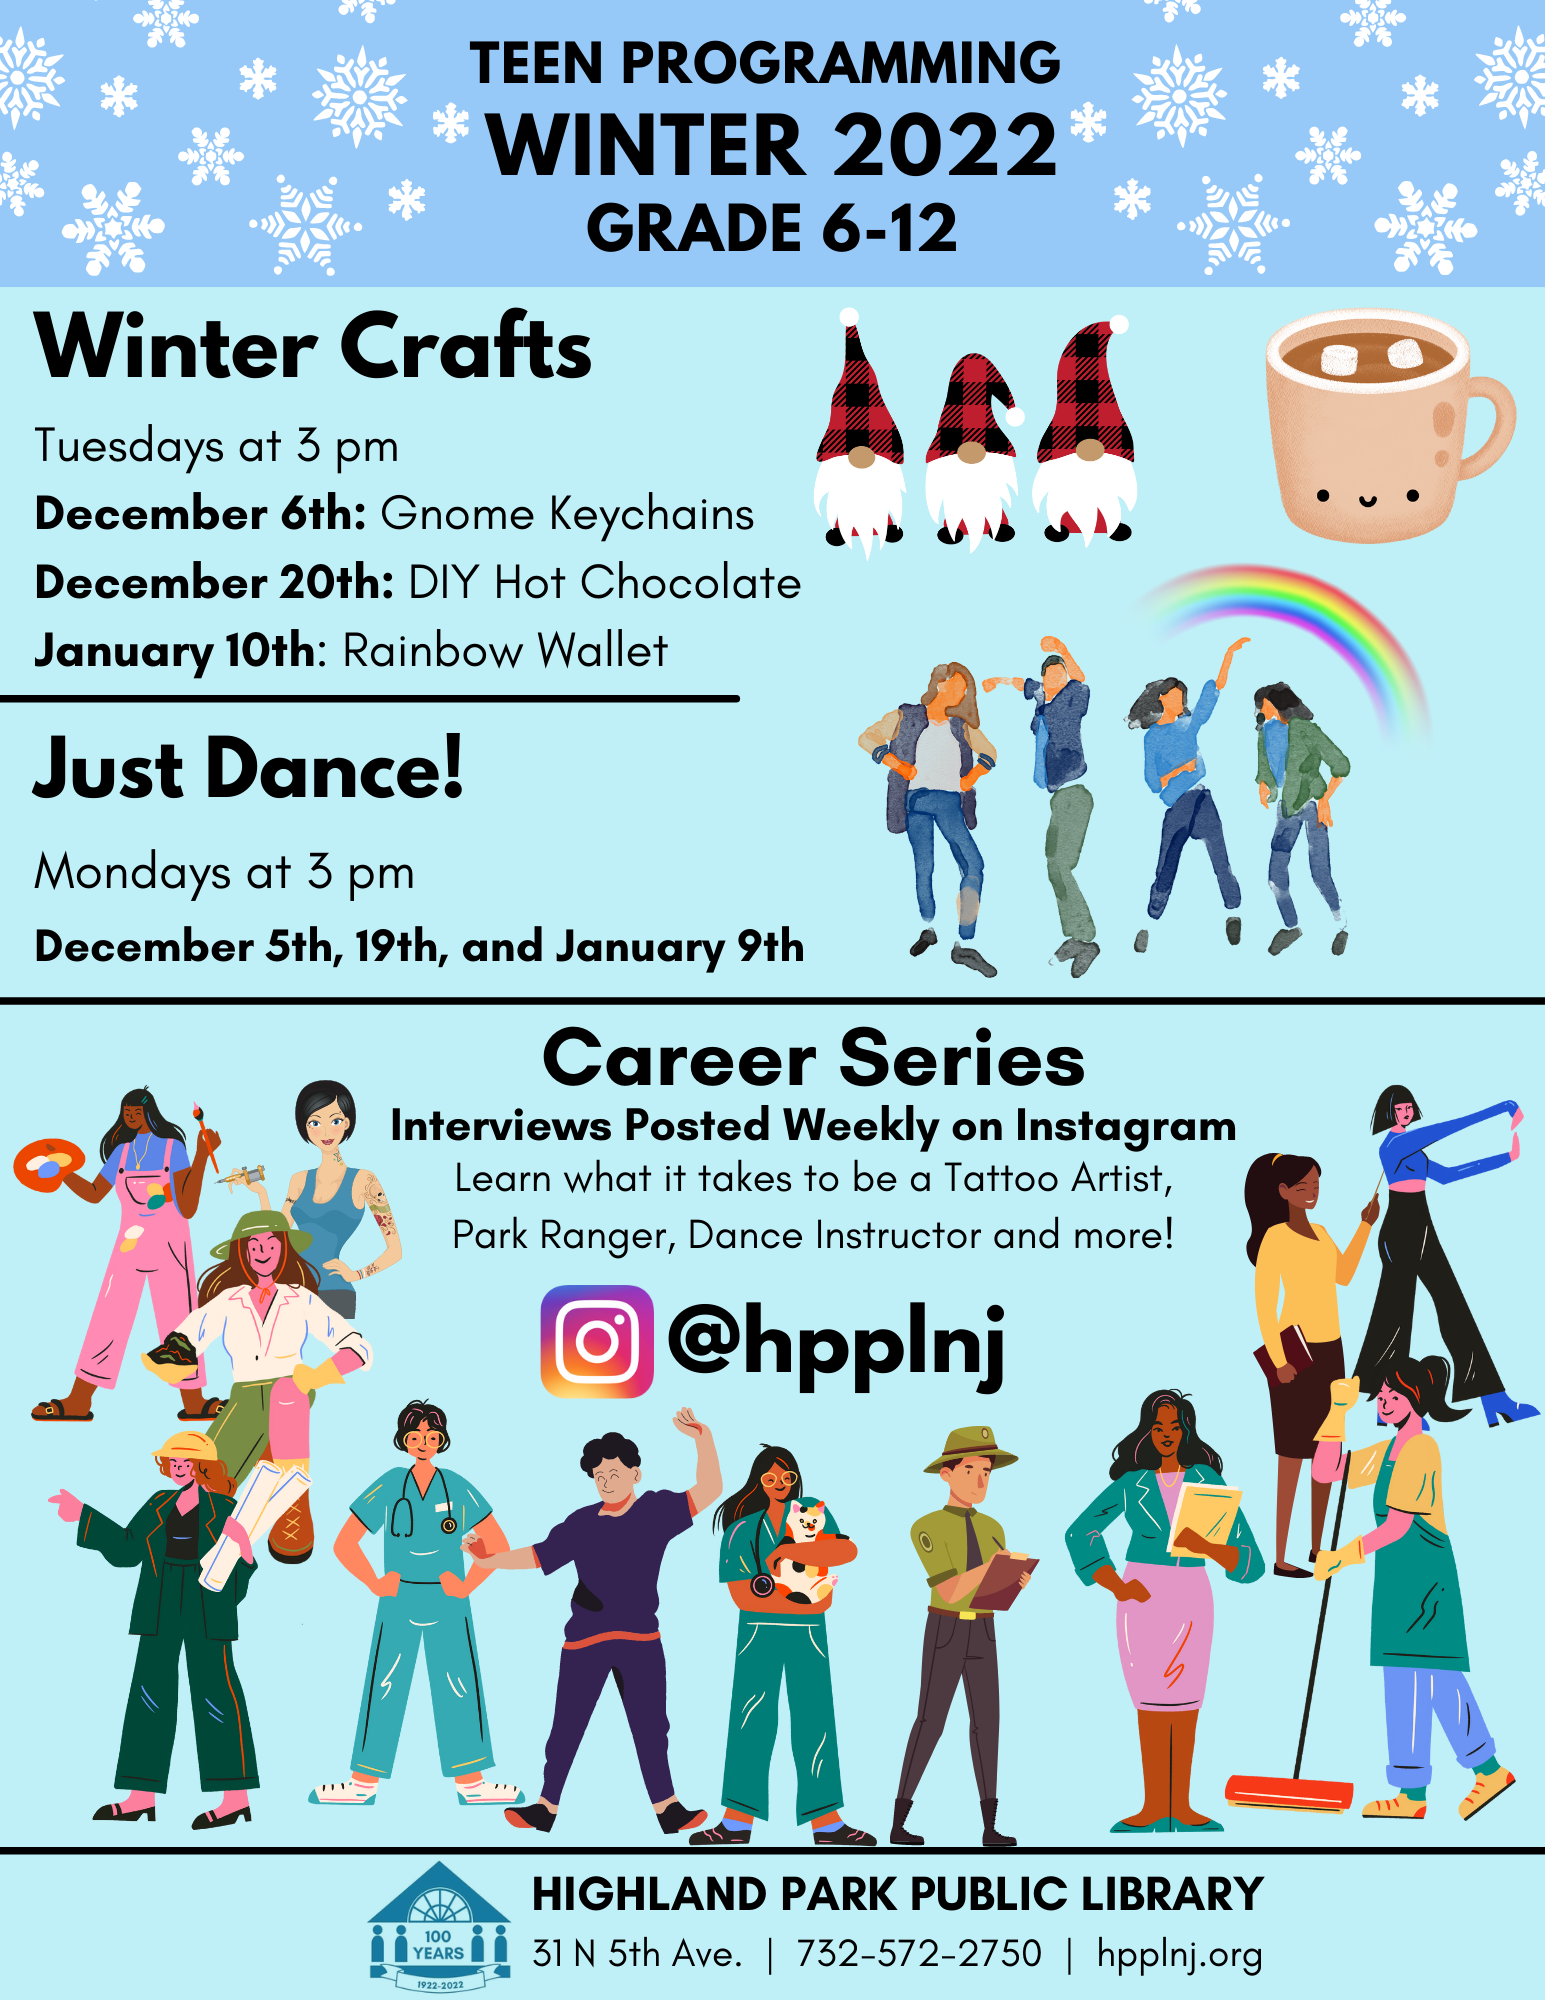 Teen programming Winter 2022 Winter Crafts Tuesdays at 3 pm December 6th: Gnome Keychains December 20th: DIY Hot Chocolate January 10th: Rainbow Wallet Just Dance! Mondays at 3 pm December 5th, 19th, and January 9th Career Series Interviews Posted Weekly on Instagram Learn what it takes to be a Tattoo Artist, Park Ranger, Dance Instructor and more!